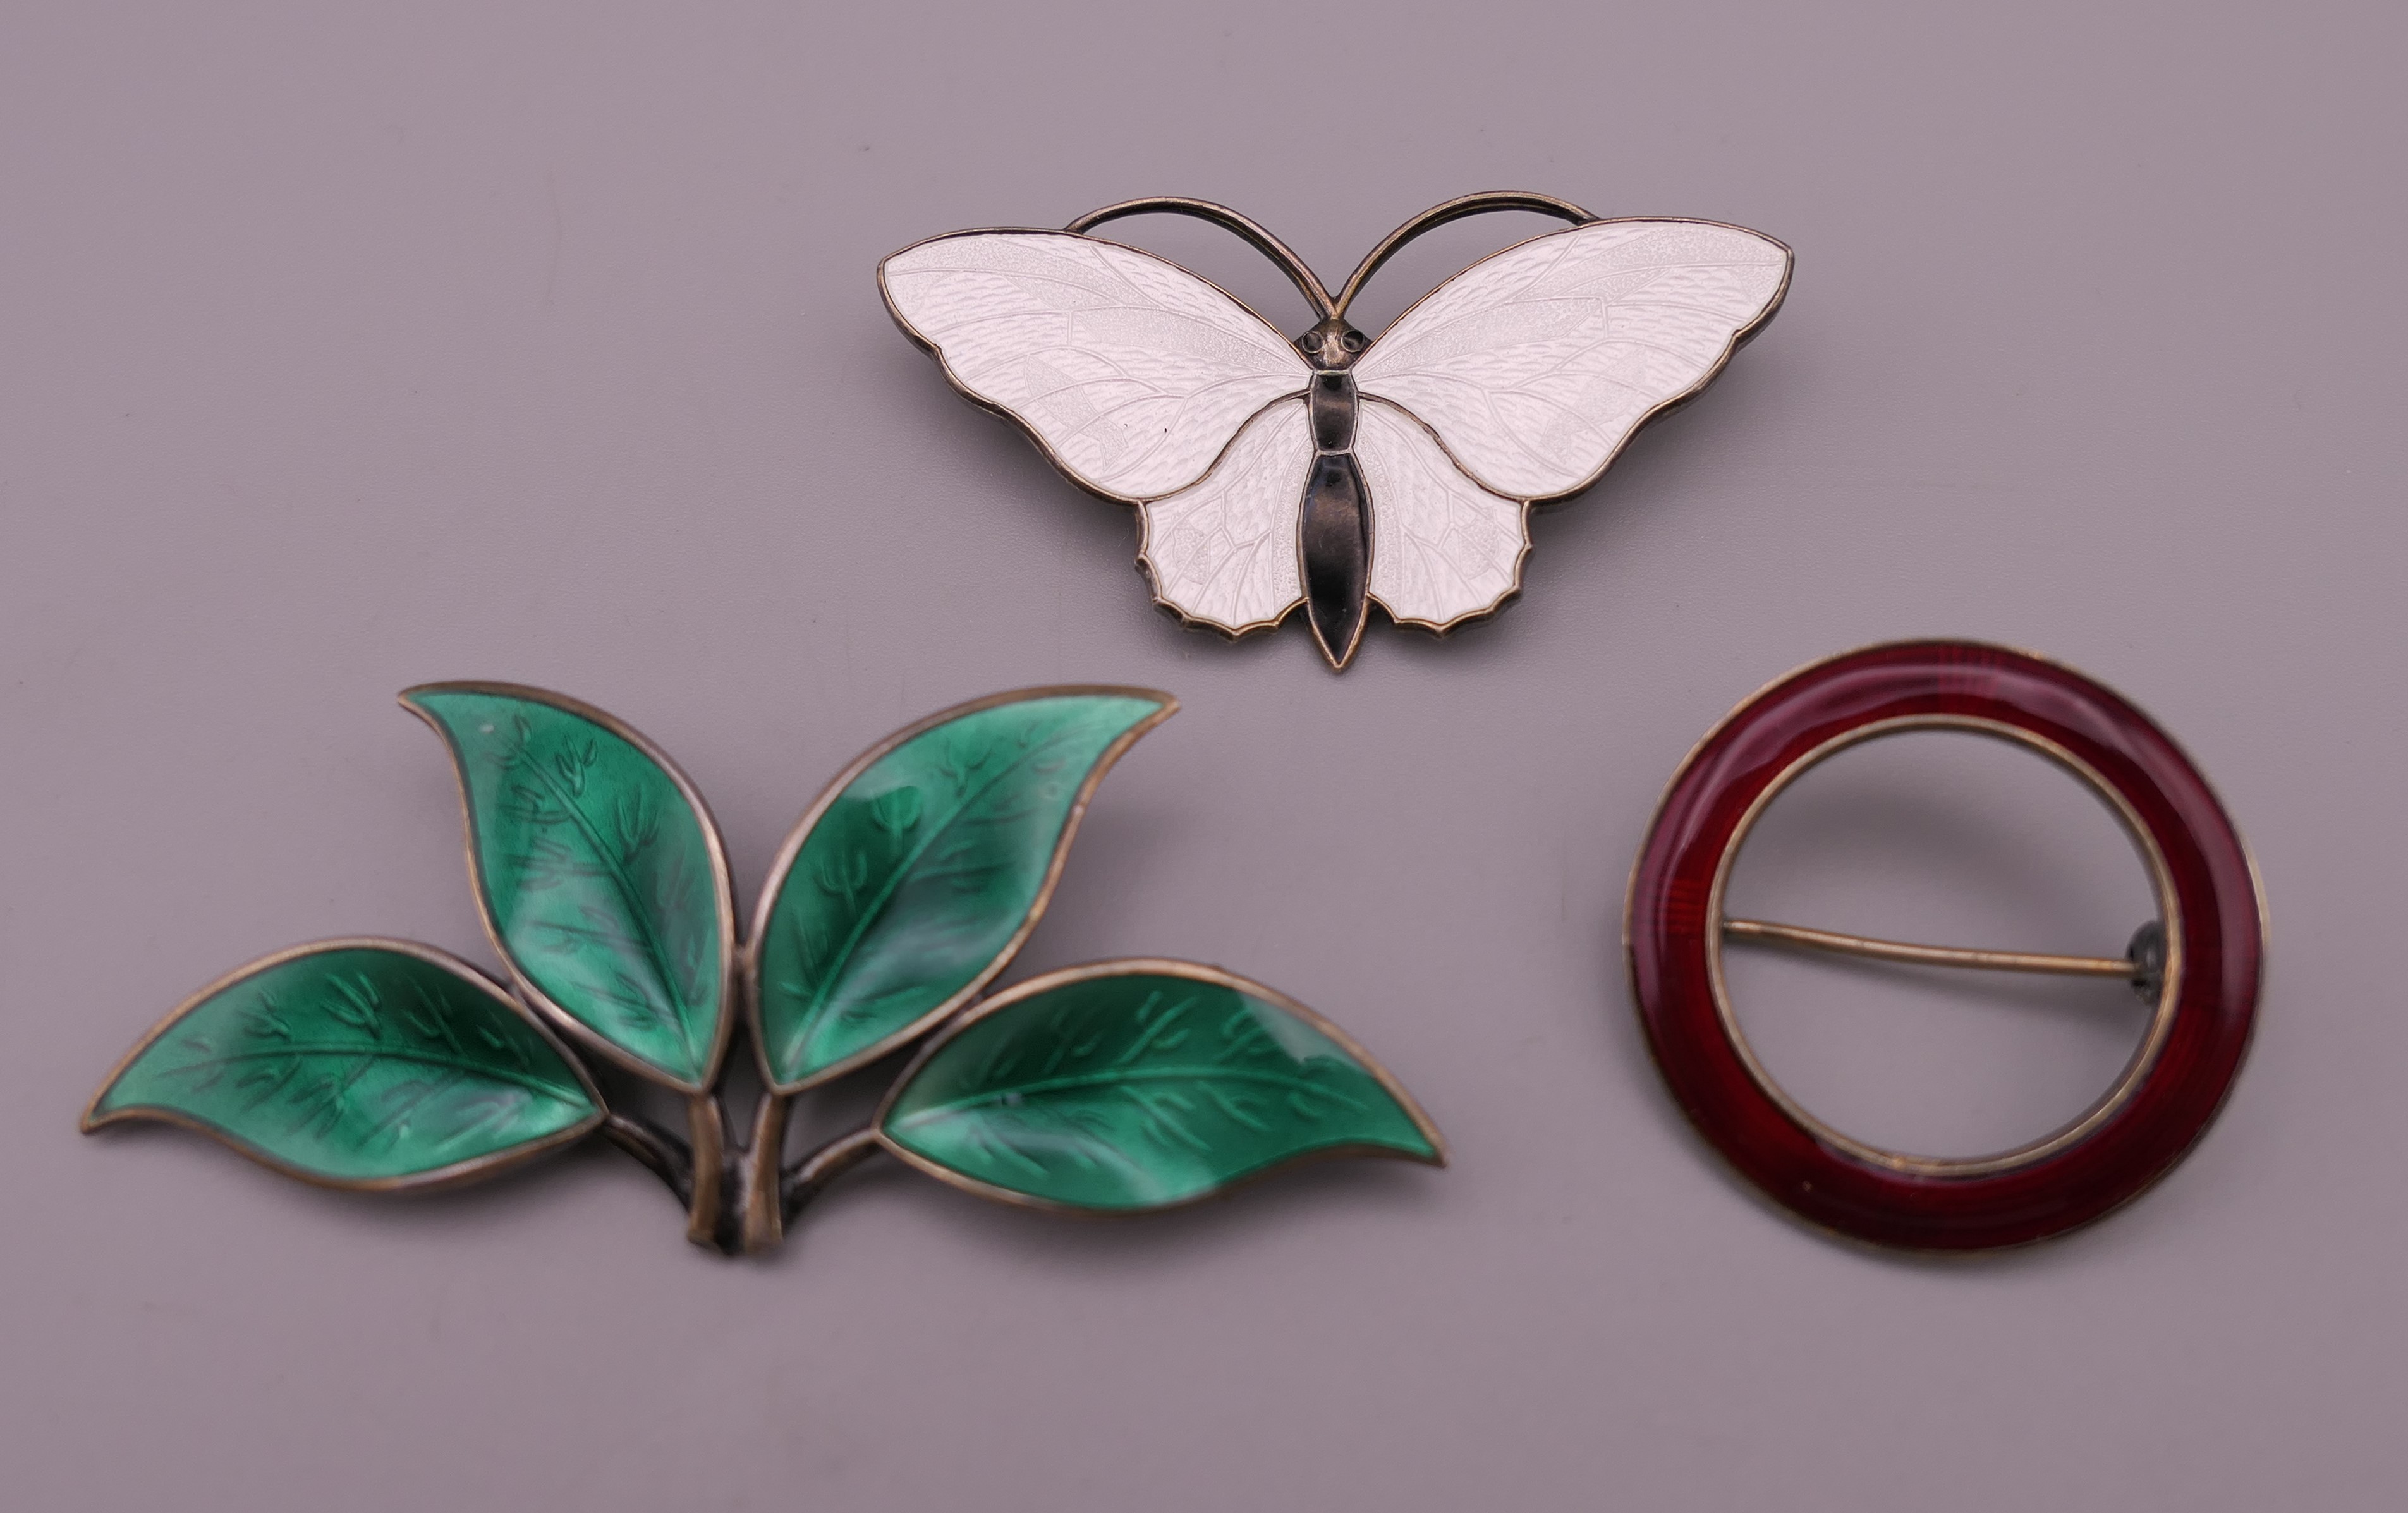 Three Norwegian silver and enamel brooches. The largest 6.5 cm long.